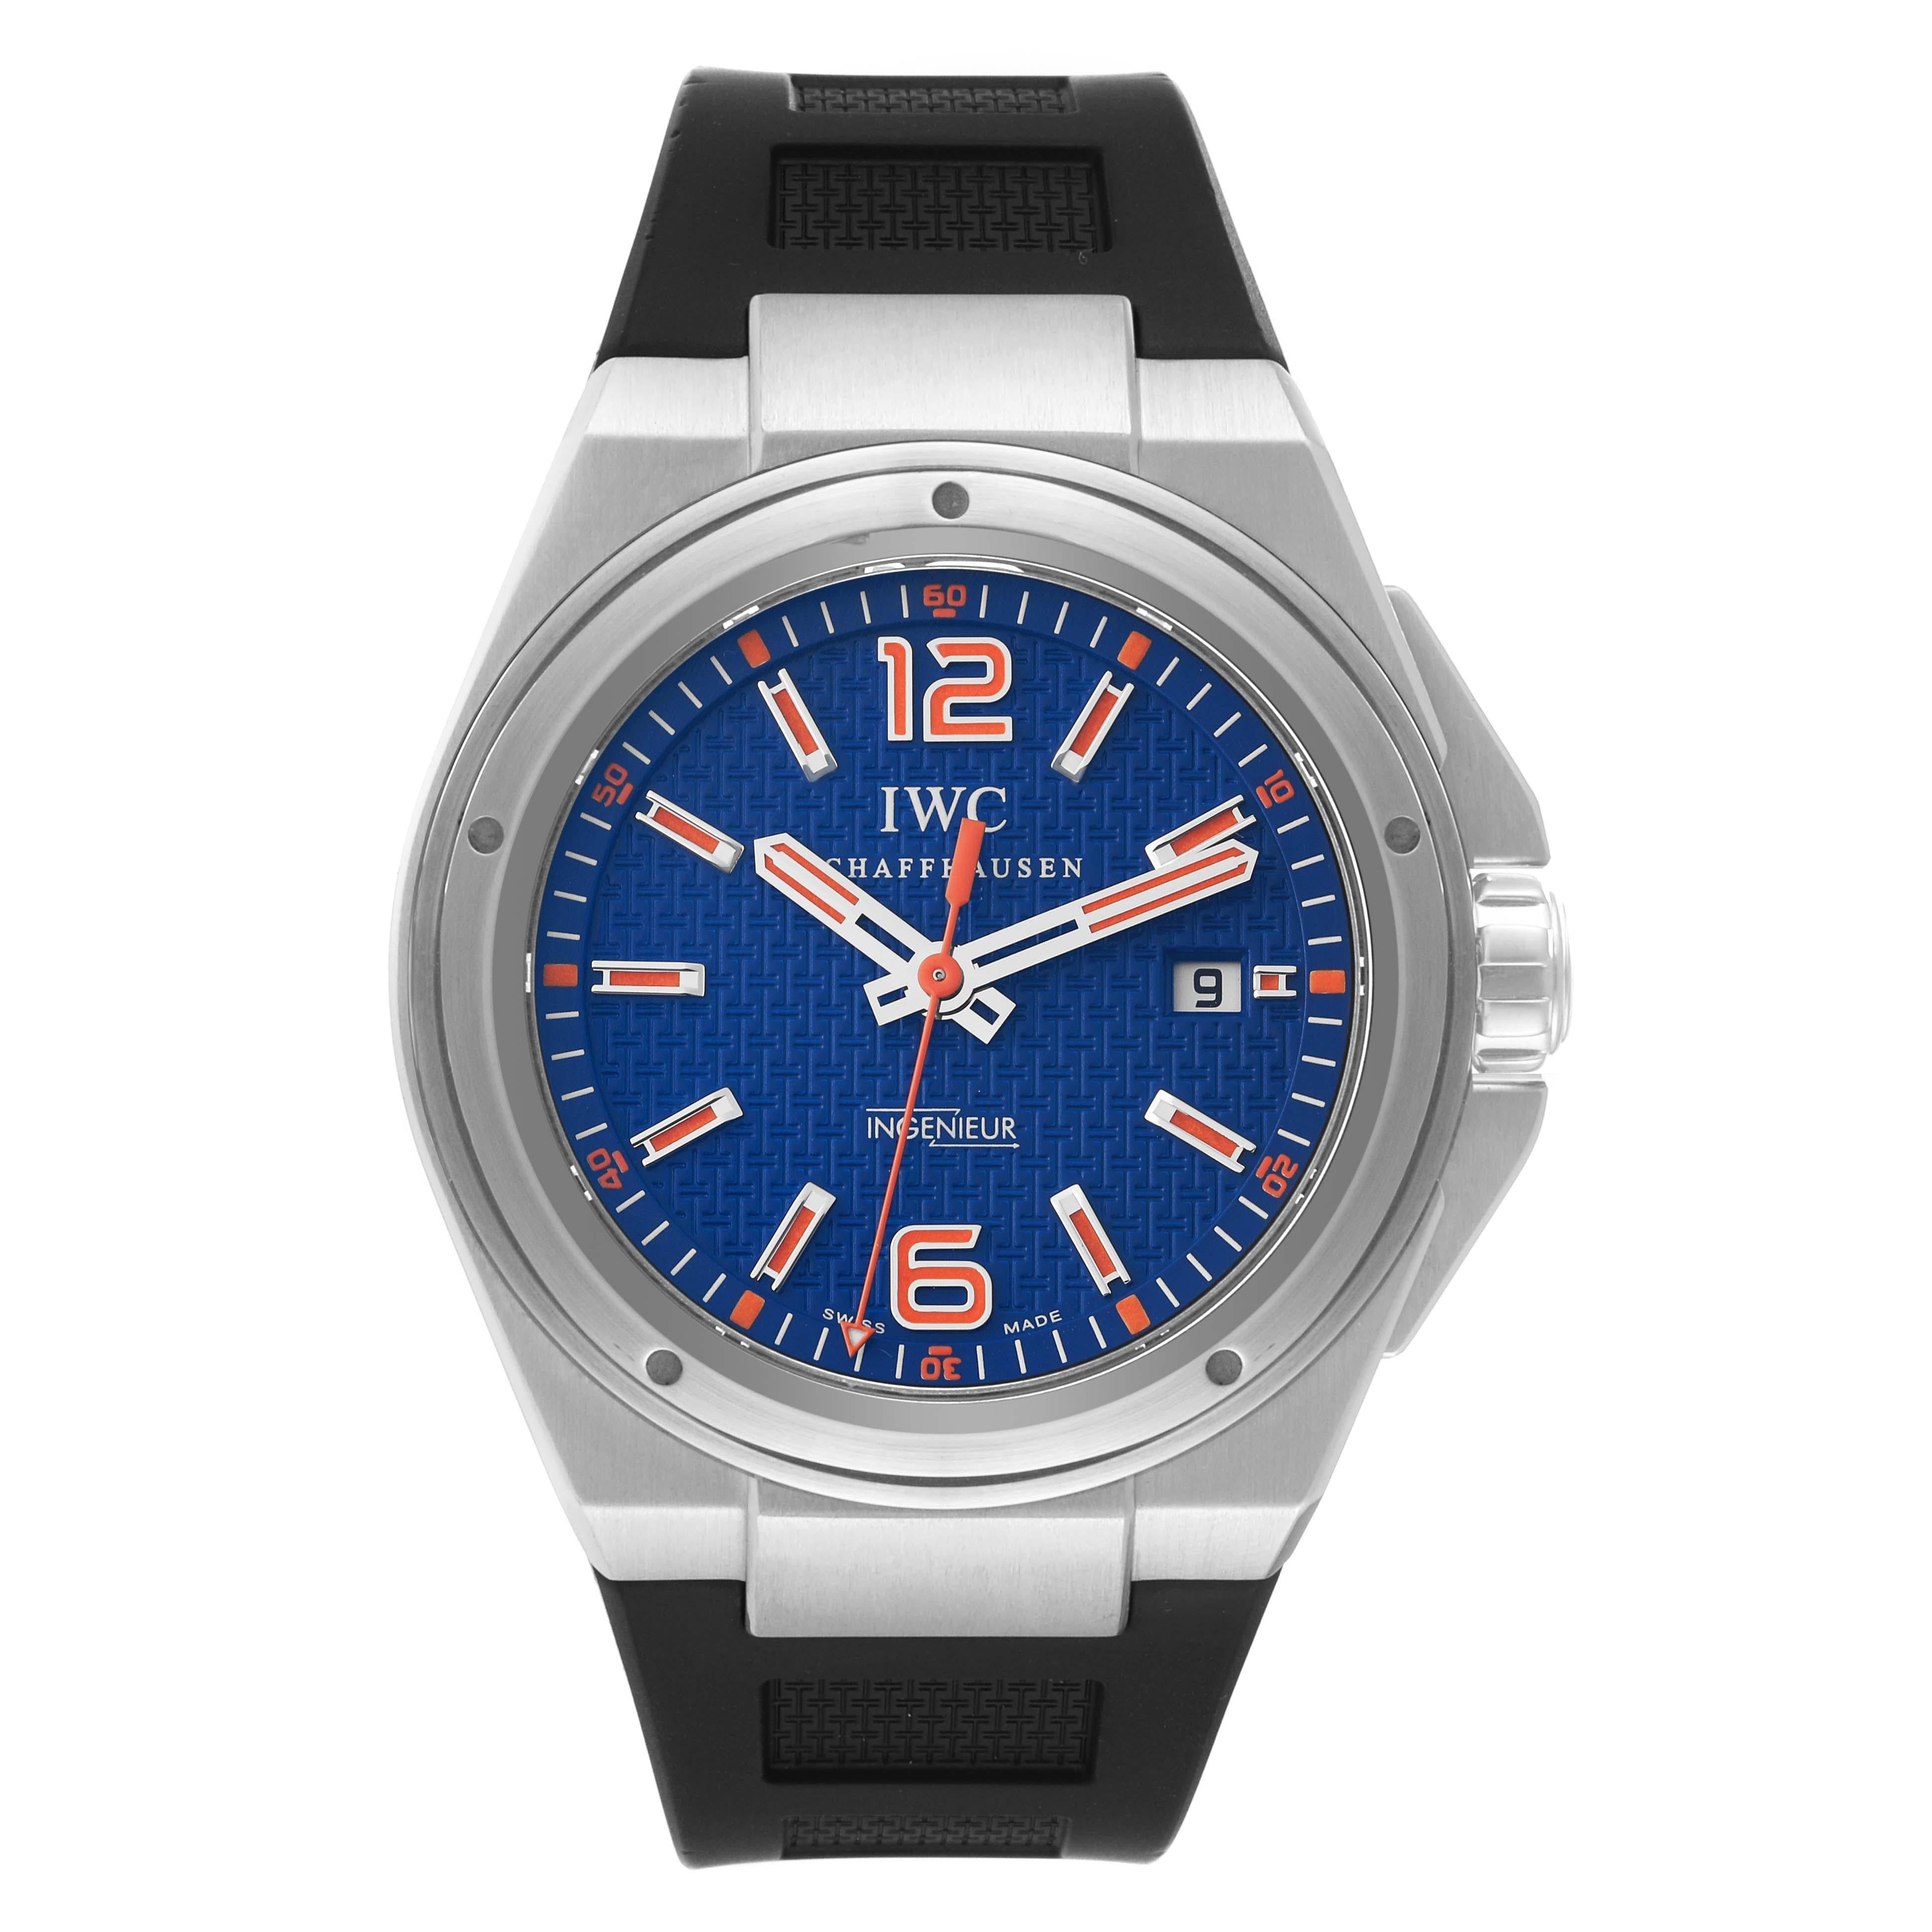 IWC Ingenieur Automatic Mission Earth Plastiki Steel Mens Watch IW323603. Automatic self-winding movement. Stainless steel case 46 mm in diameter and 15mm in thickness. Stainless steel bezel. Scratch resistant sapphire crystal. Blue dial with fine